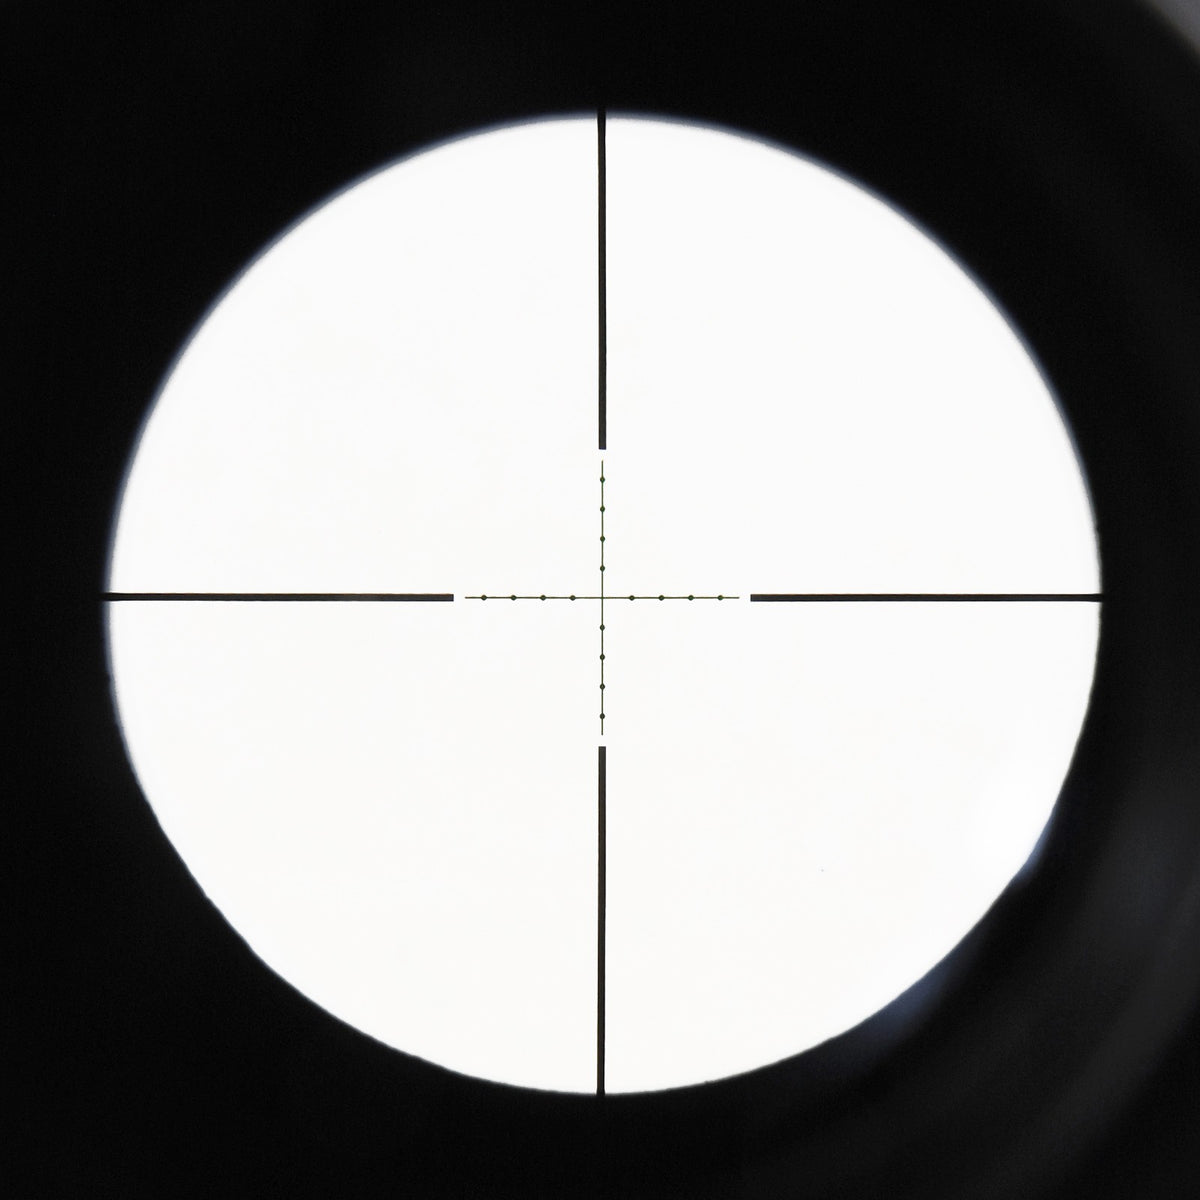 1-4x24E Red / Green / Blue Reticle